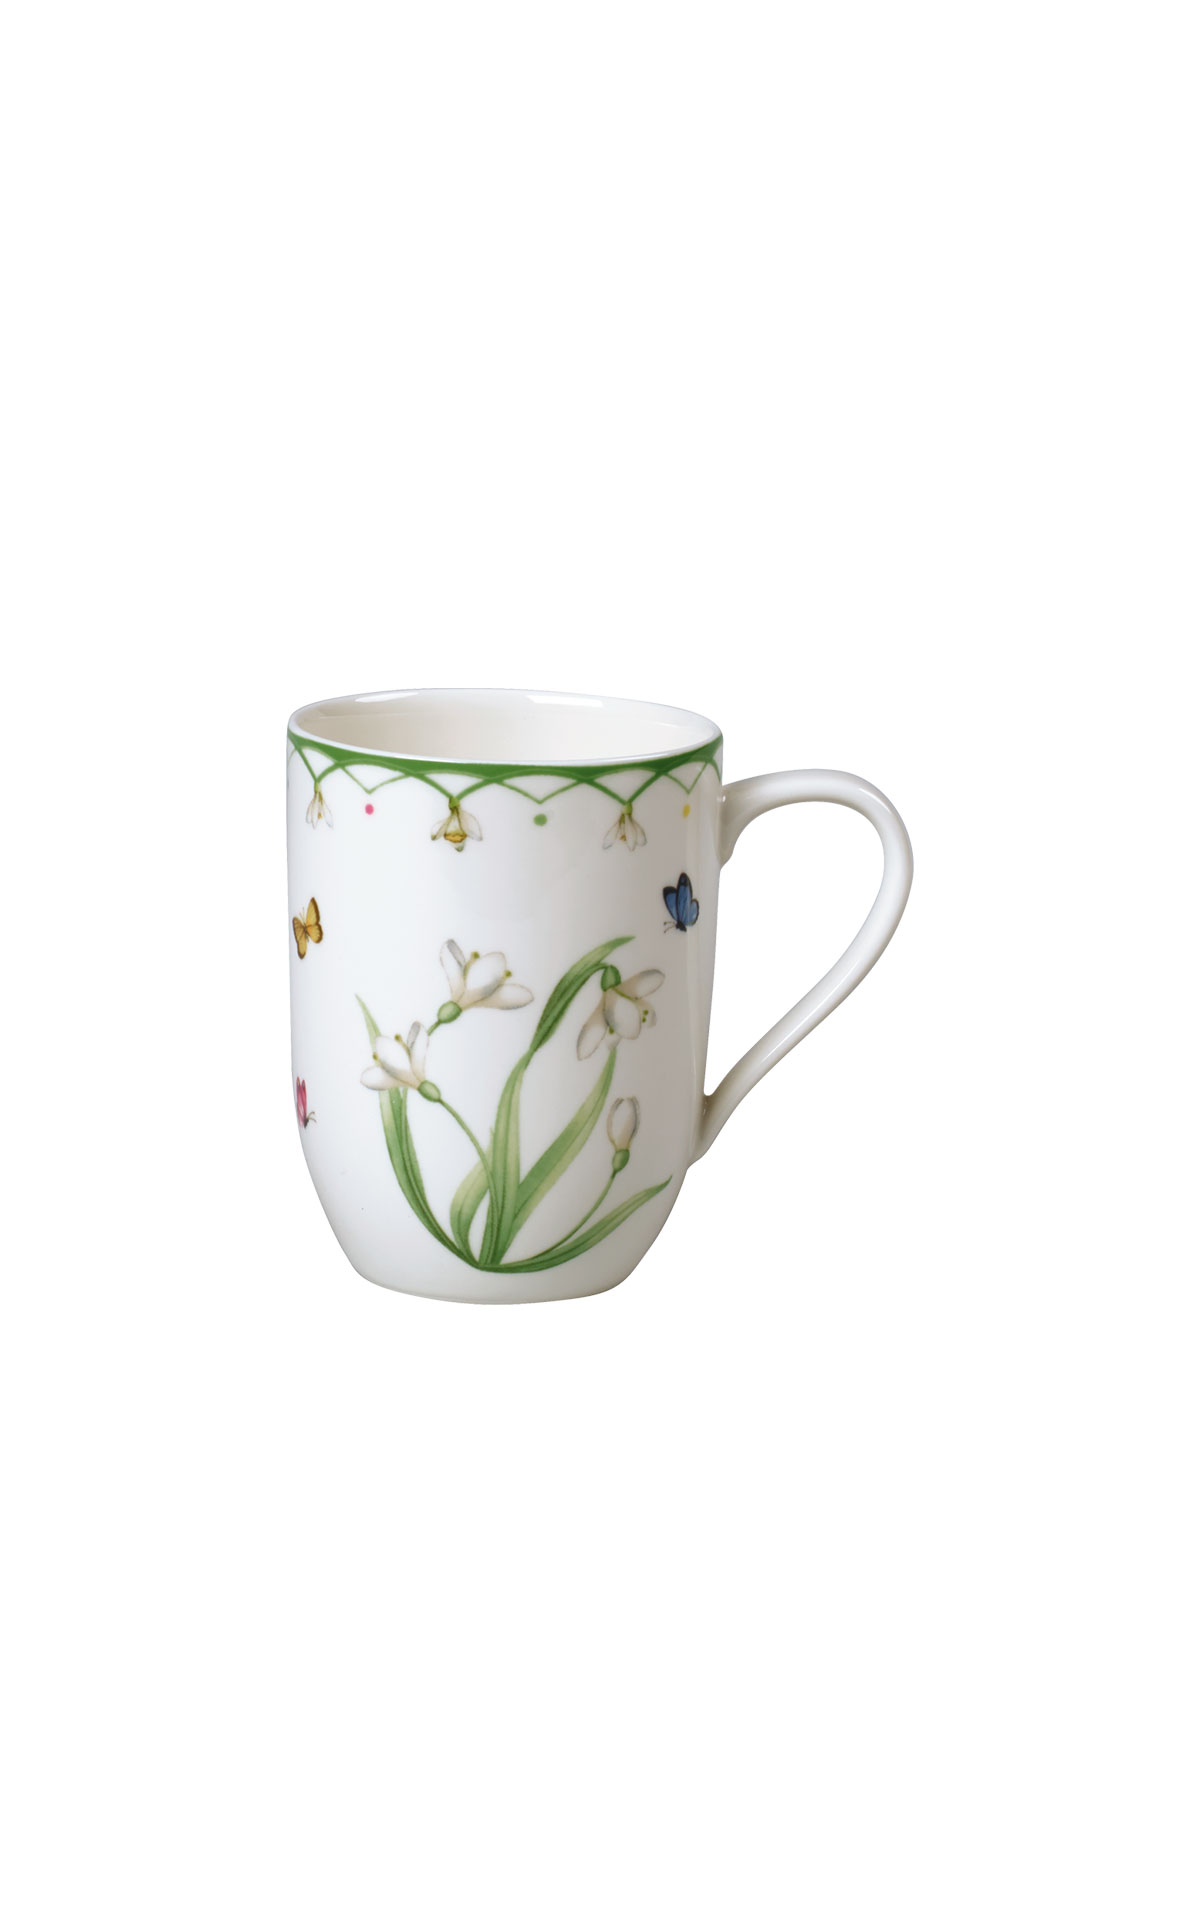 Villeroy and Boch Colourful spring mug  from Bicester Village